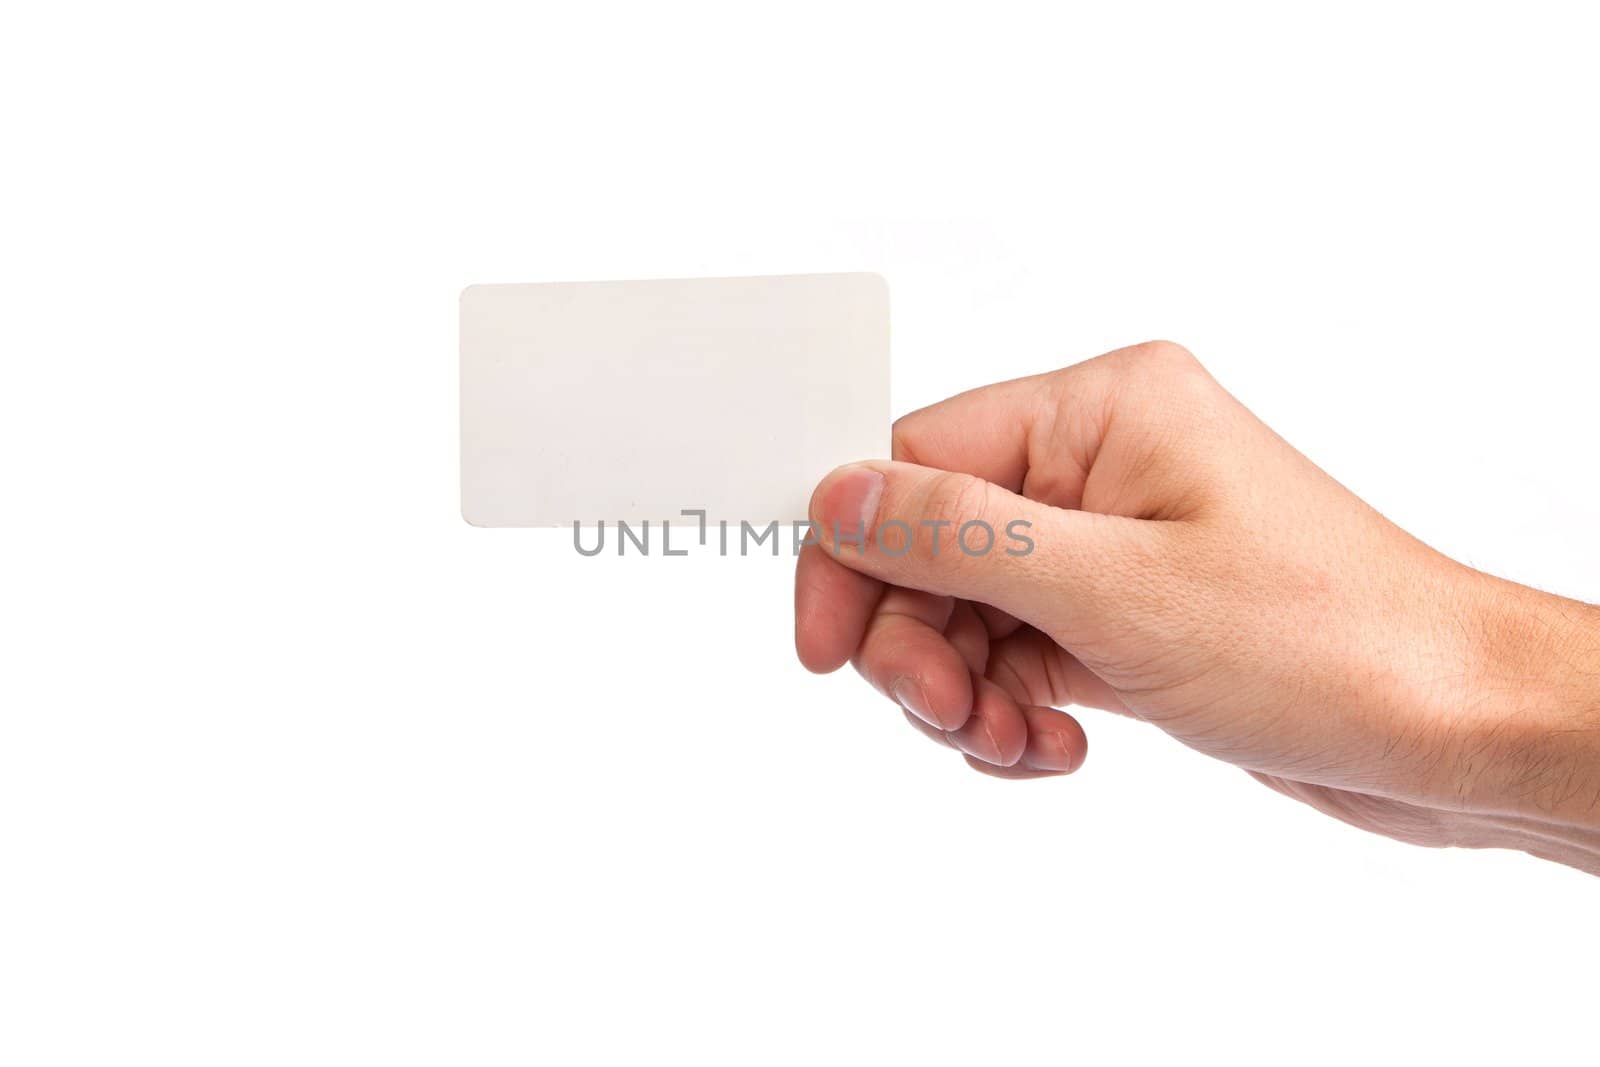 Businessman's hand holding blank paper business card, closeup isolated on white background